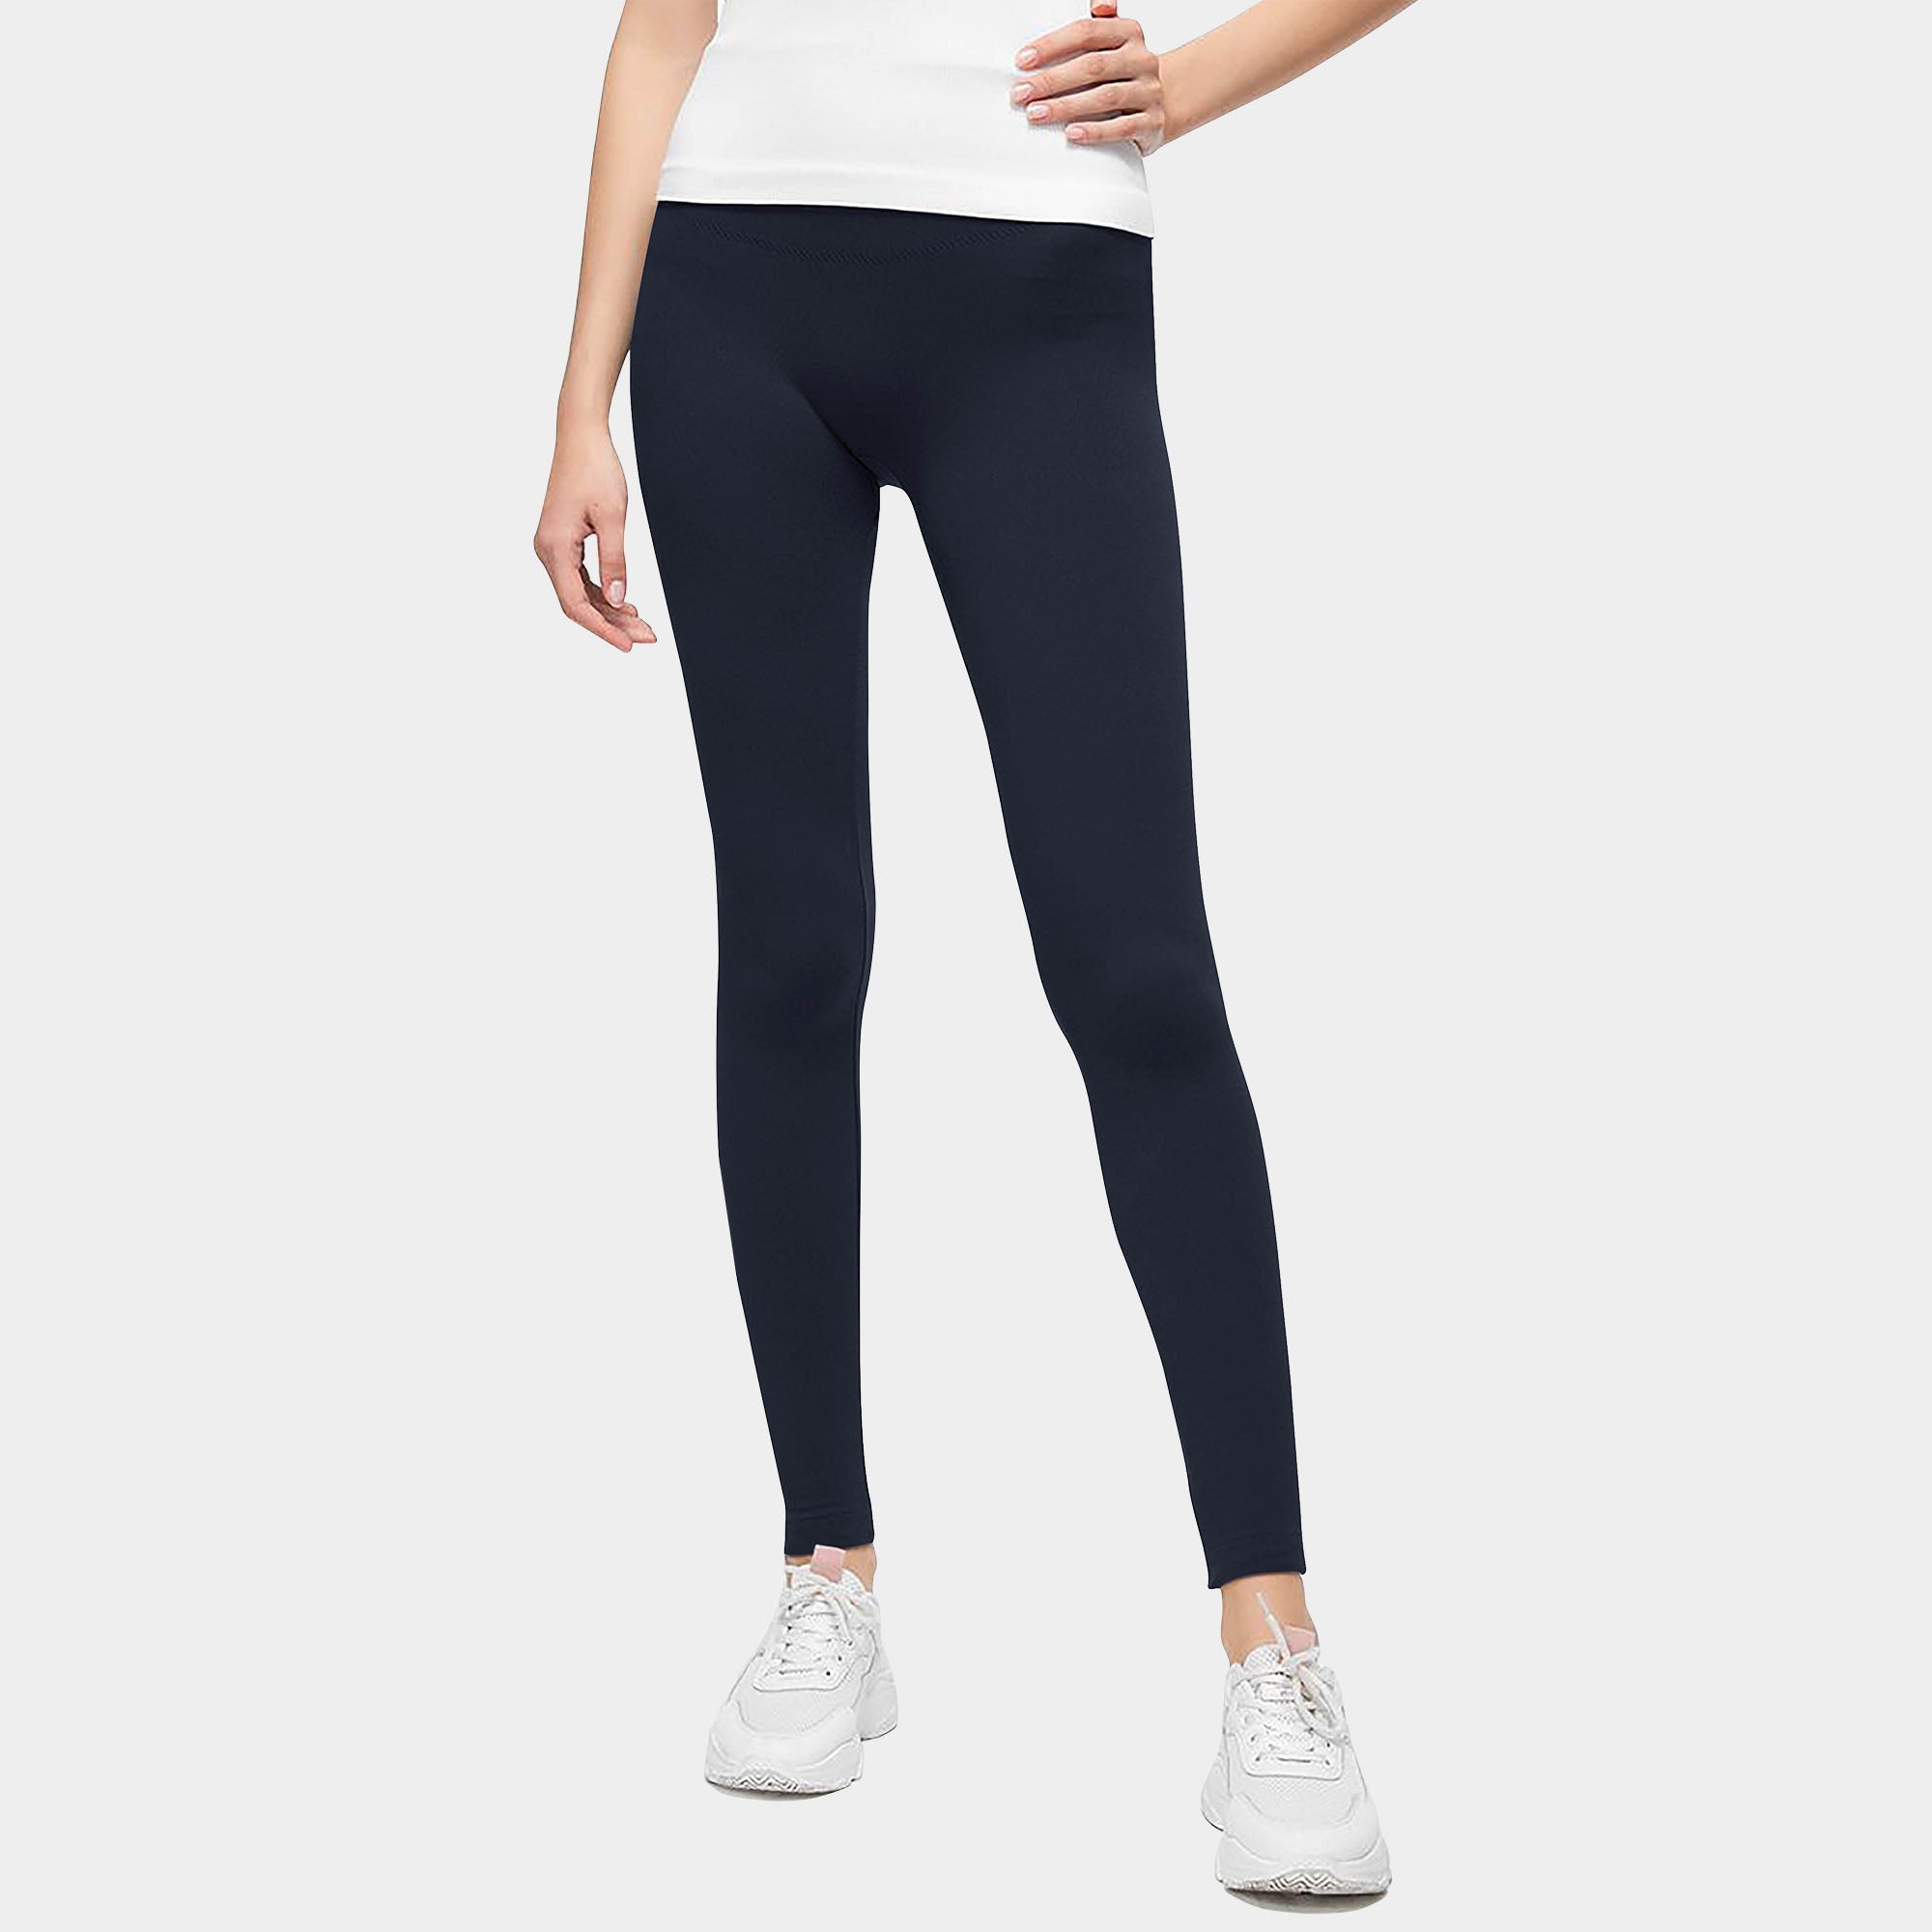 high_waist_inner_soft_lined_waistband_lightweight_yoga_thermal_cozy_comfortable_fashionable_pants_leggins_leggings_spanx_leather_ballet_pilates_polainas_de_las_mujeres_workout_compression_wrinkle_resistant_treggings_best_sexy_jegging_women_girl_girls_womens_spandex_running_winter_squat_thick_cheap_anti_cellulite_pants_sweatpant_sweatpants_ladies_Navy